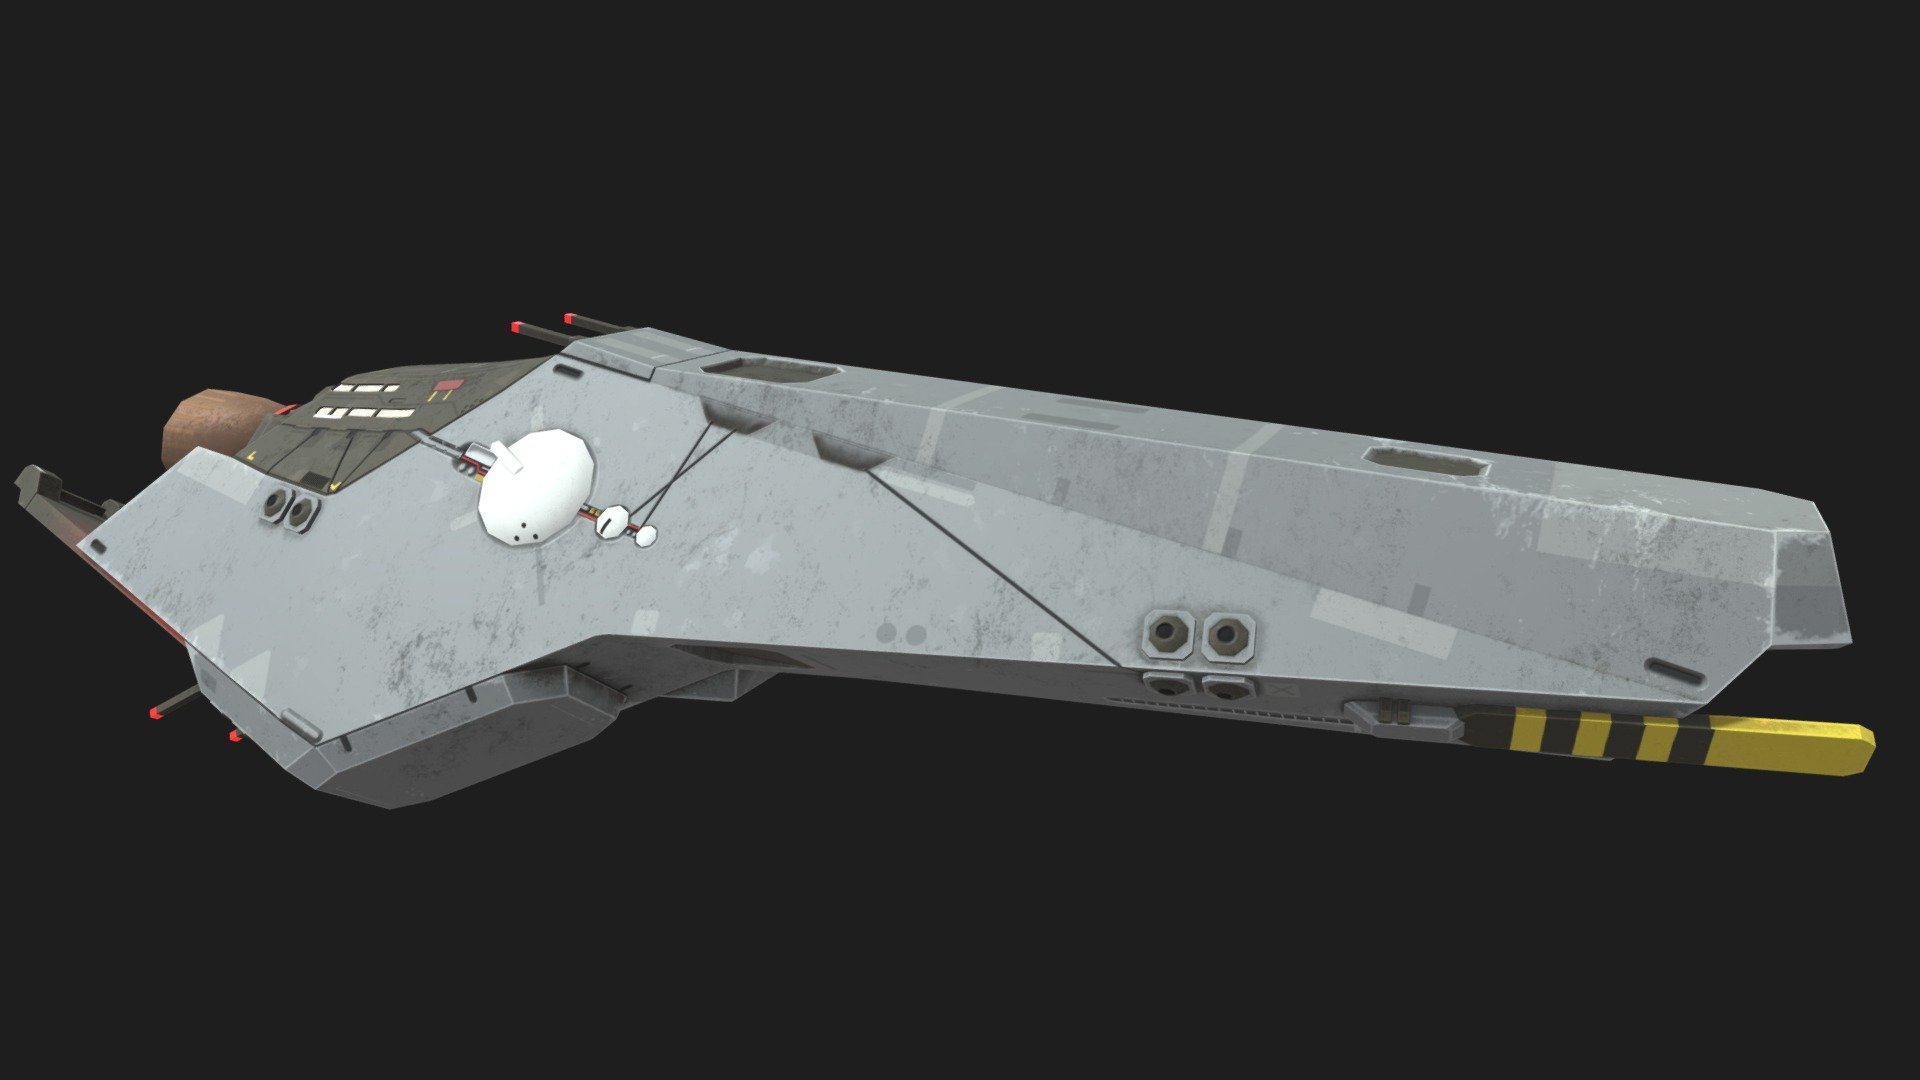 First ship for my next Nebulous project, something a little less regular.

It was a bit difficult to get the scrappy look I wanted while keeping the level of detail within acceptable margins, I think the rest of the vibe will come from the paint masks 3d model